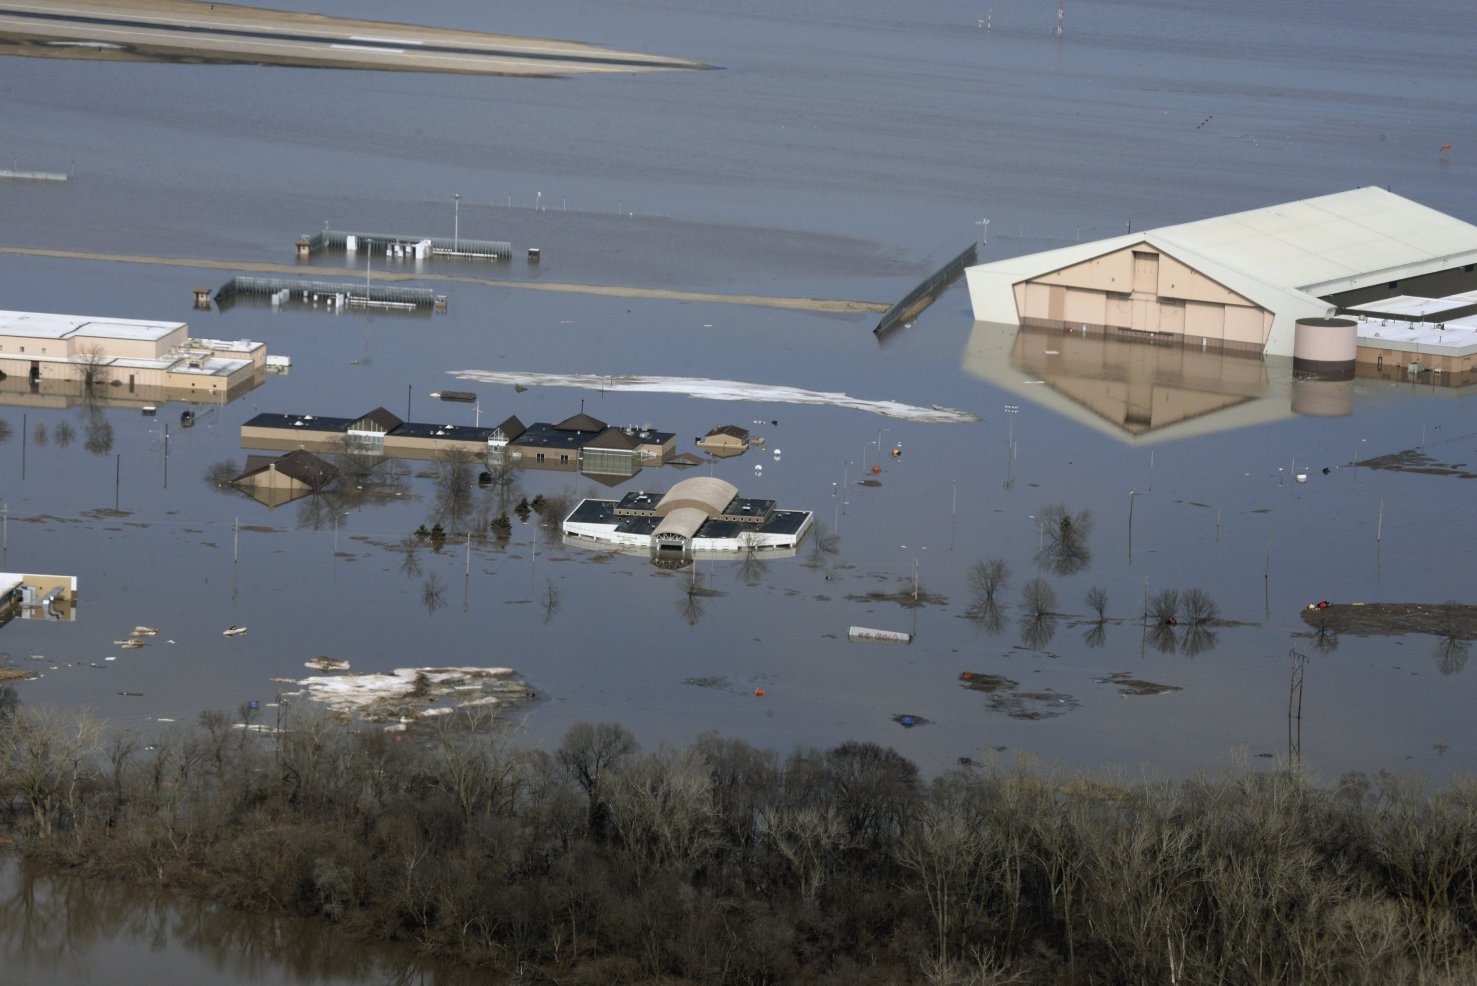 Flooding in the Midwestern US during March 2019 damaged many buildings on the southern half of Offutt Air Force Base, Nebraska. (USAF)